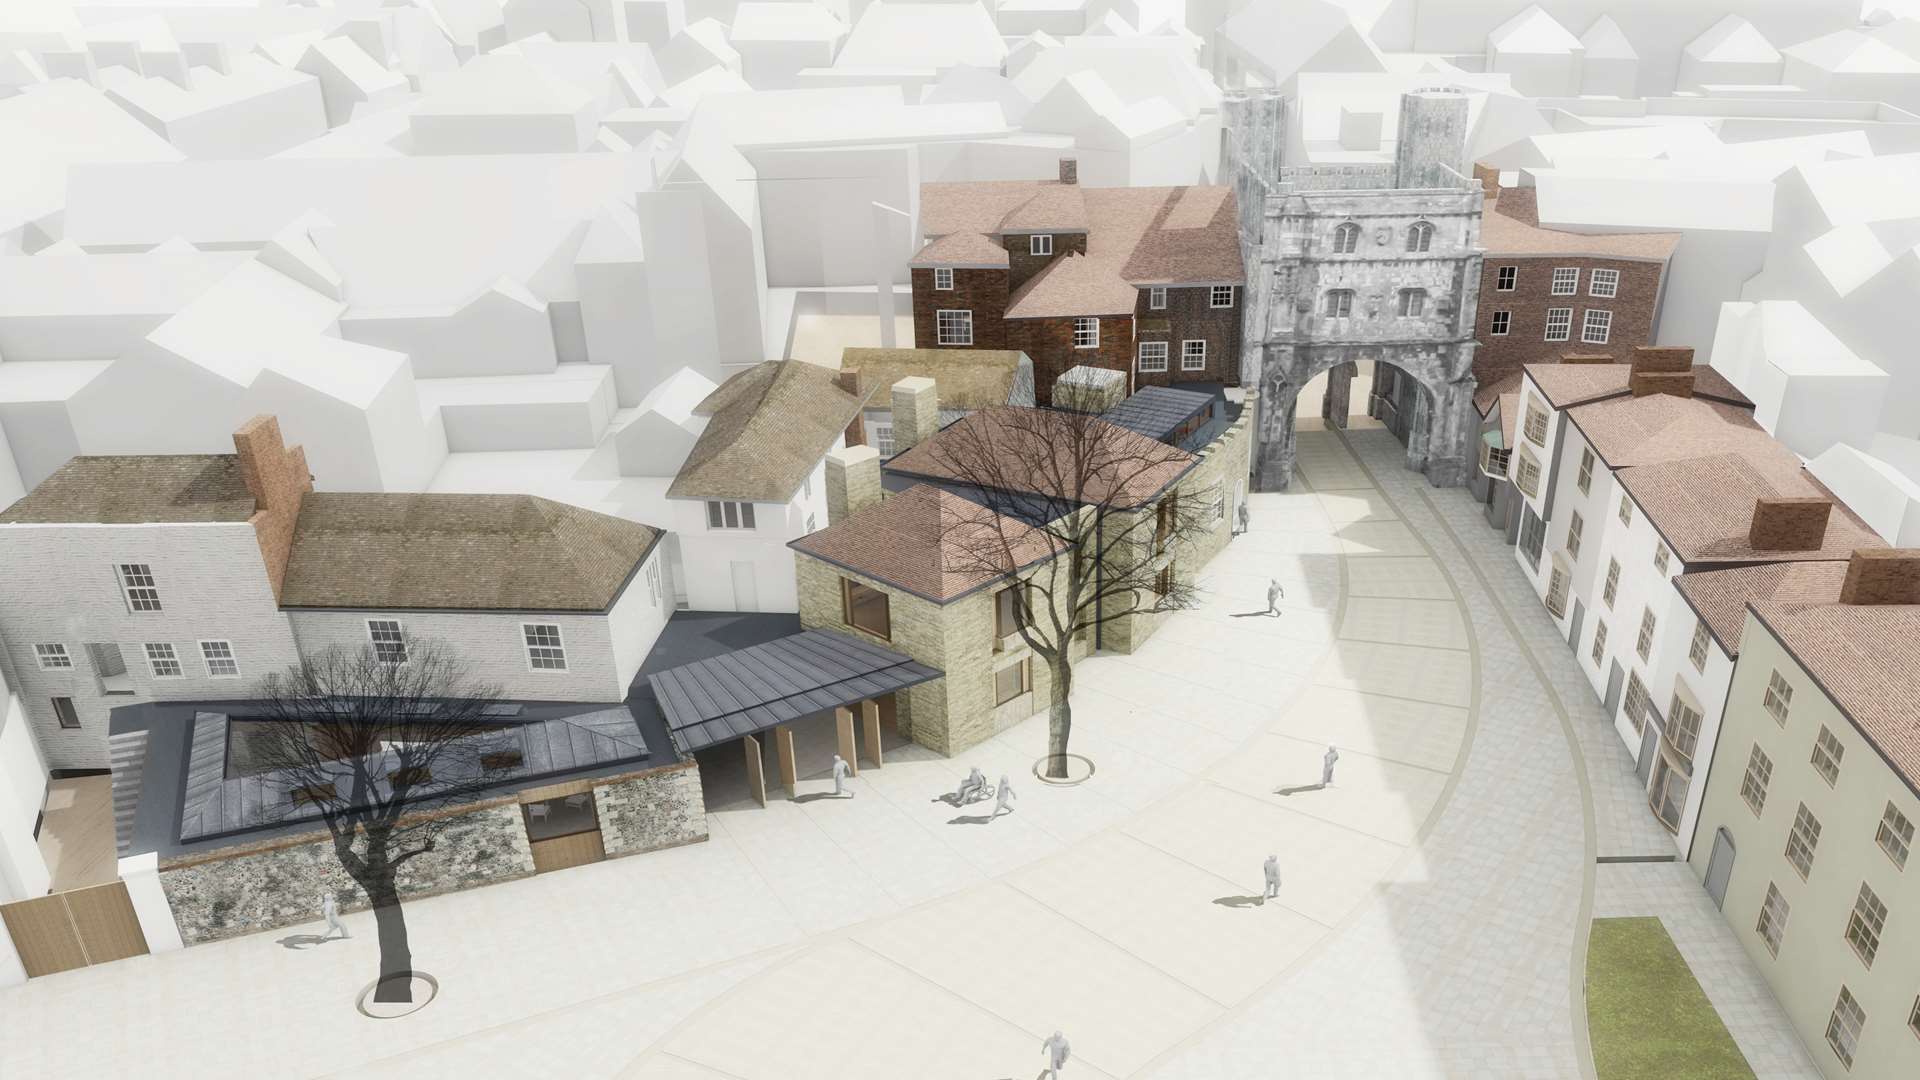 Plans for a new welcome centre at Canterbury Cathedral have been revealed